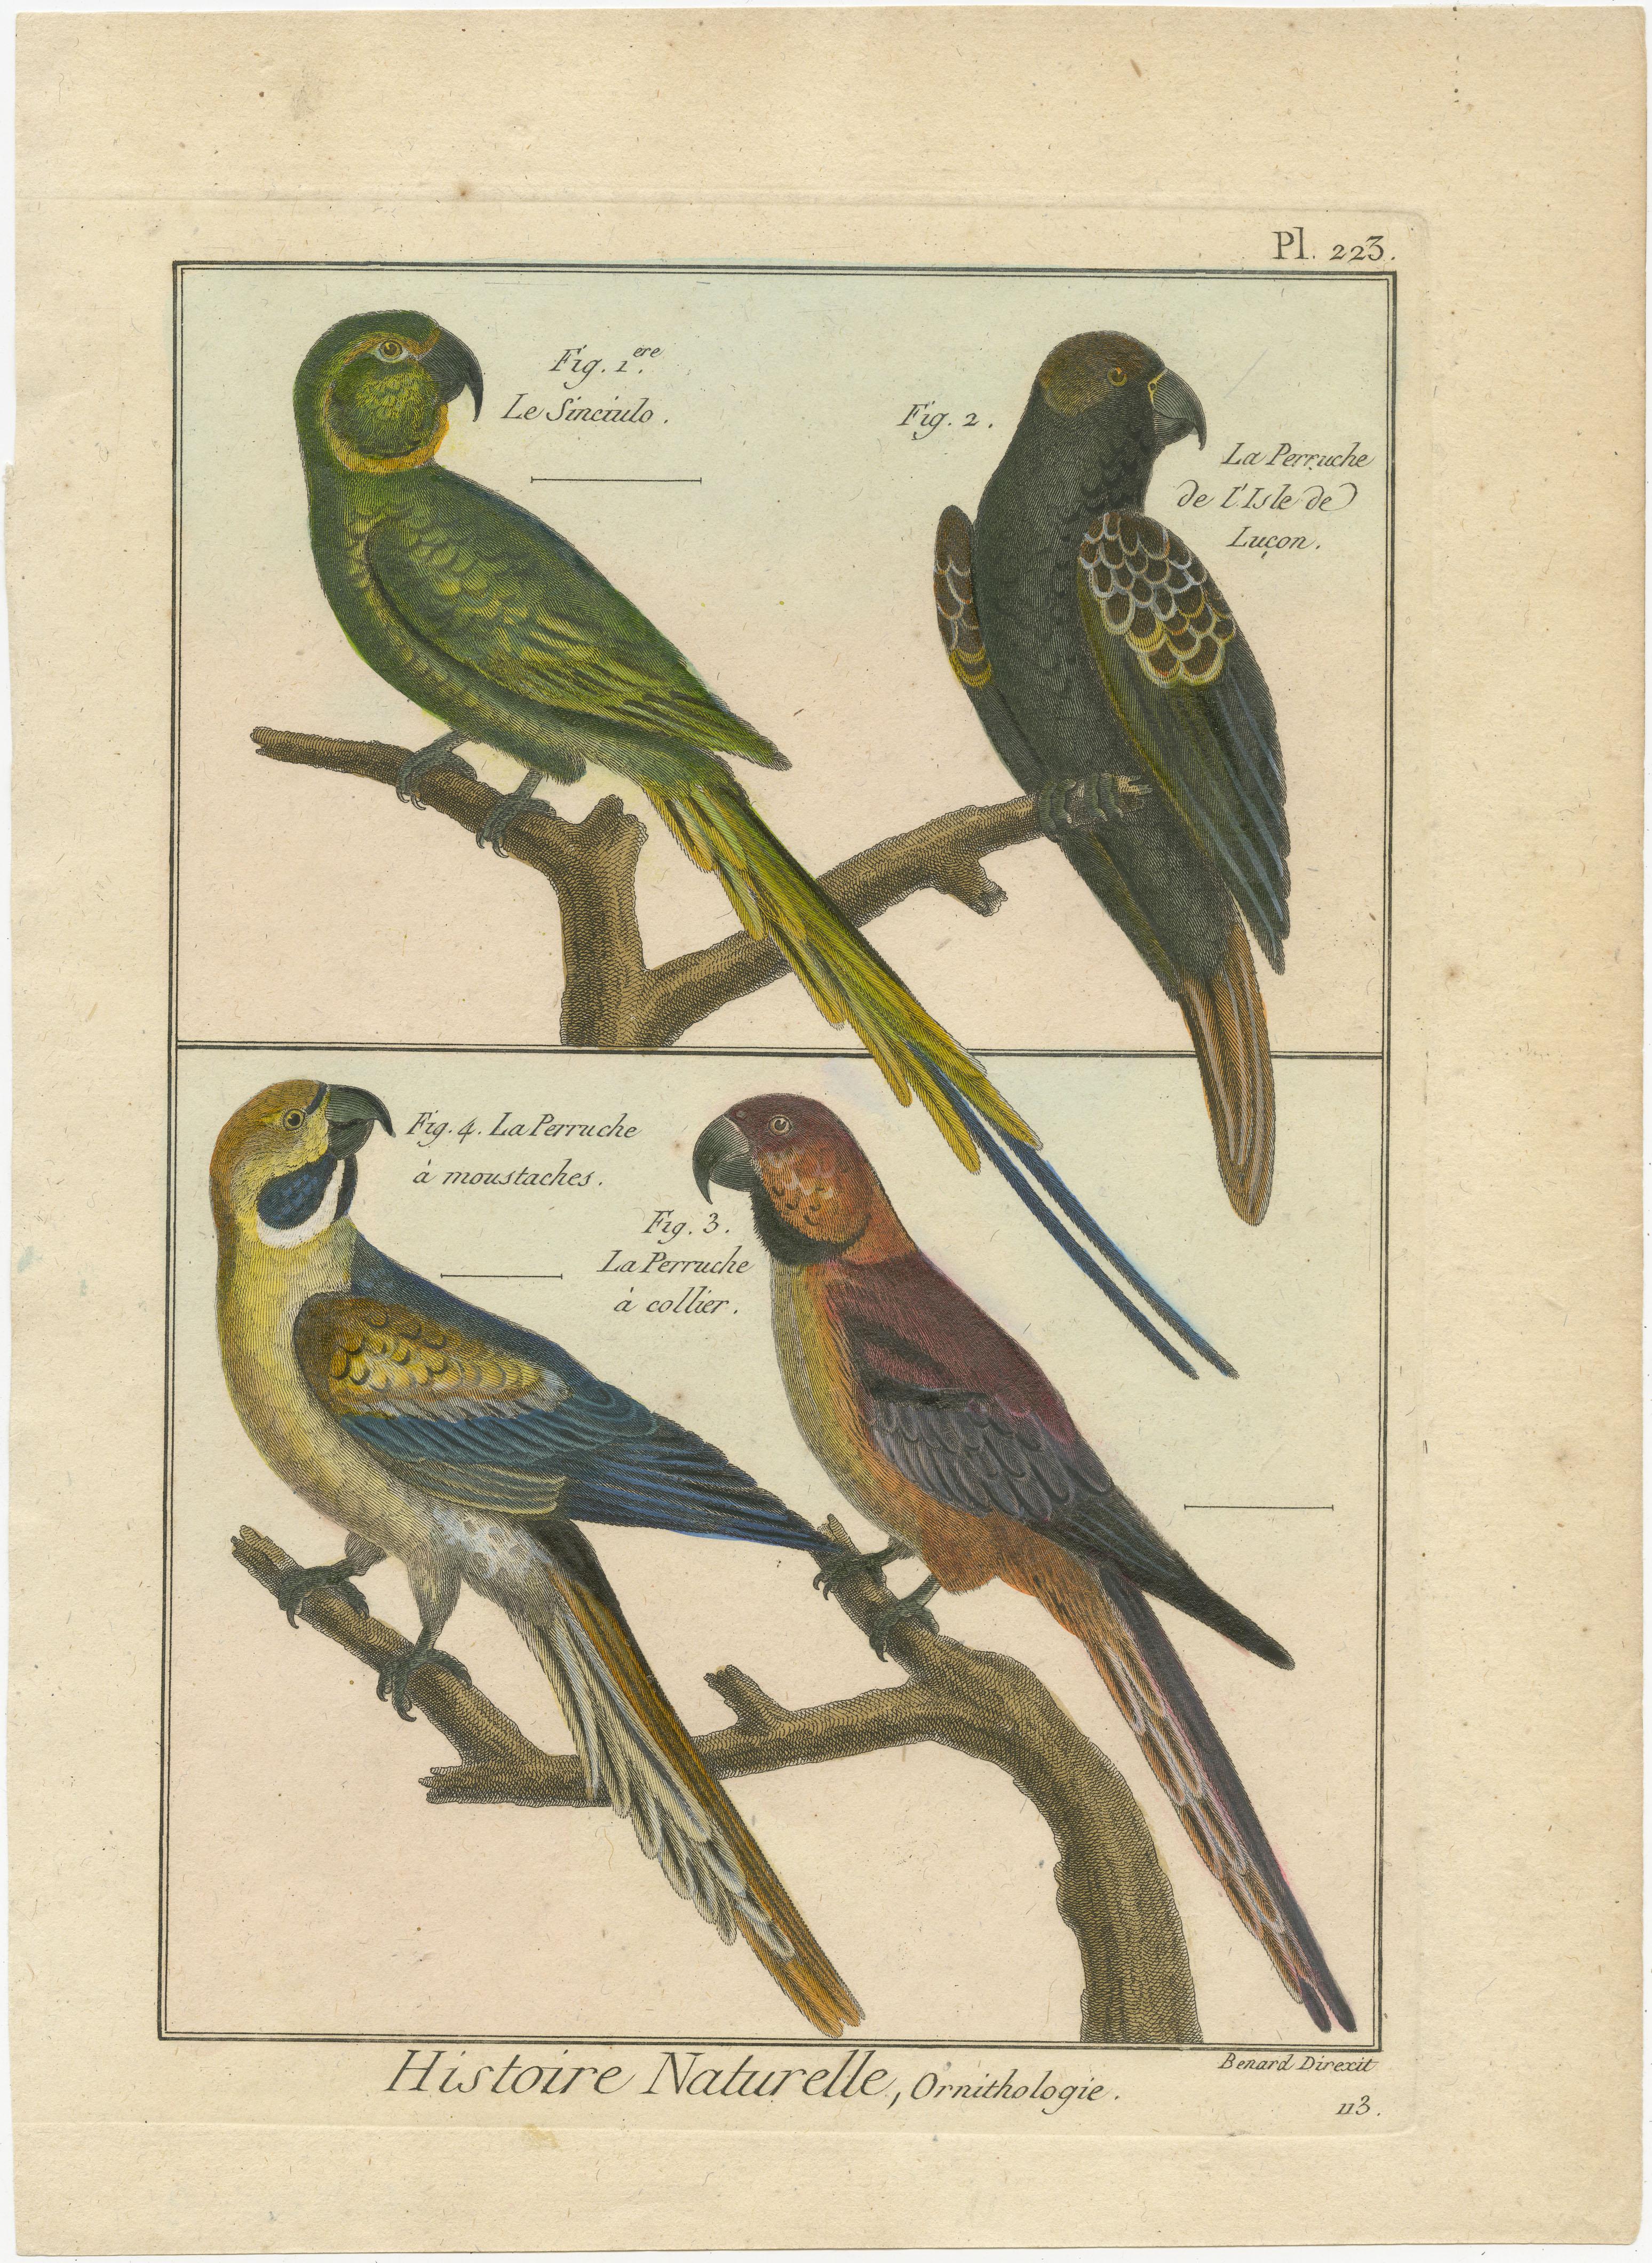 An authentic, perfect and bright, originally hand-colored, illustration of 4 birds: Le Sinciulo [French], and 3 Parakeets. These are La Perruche de L'Isle de Lucon, La Perruche a Moustaches and La Perruche a Collier. Drawn on parchment paper (copper